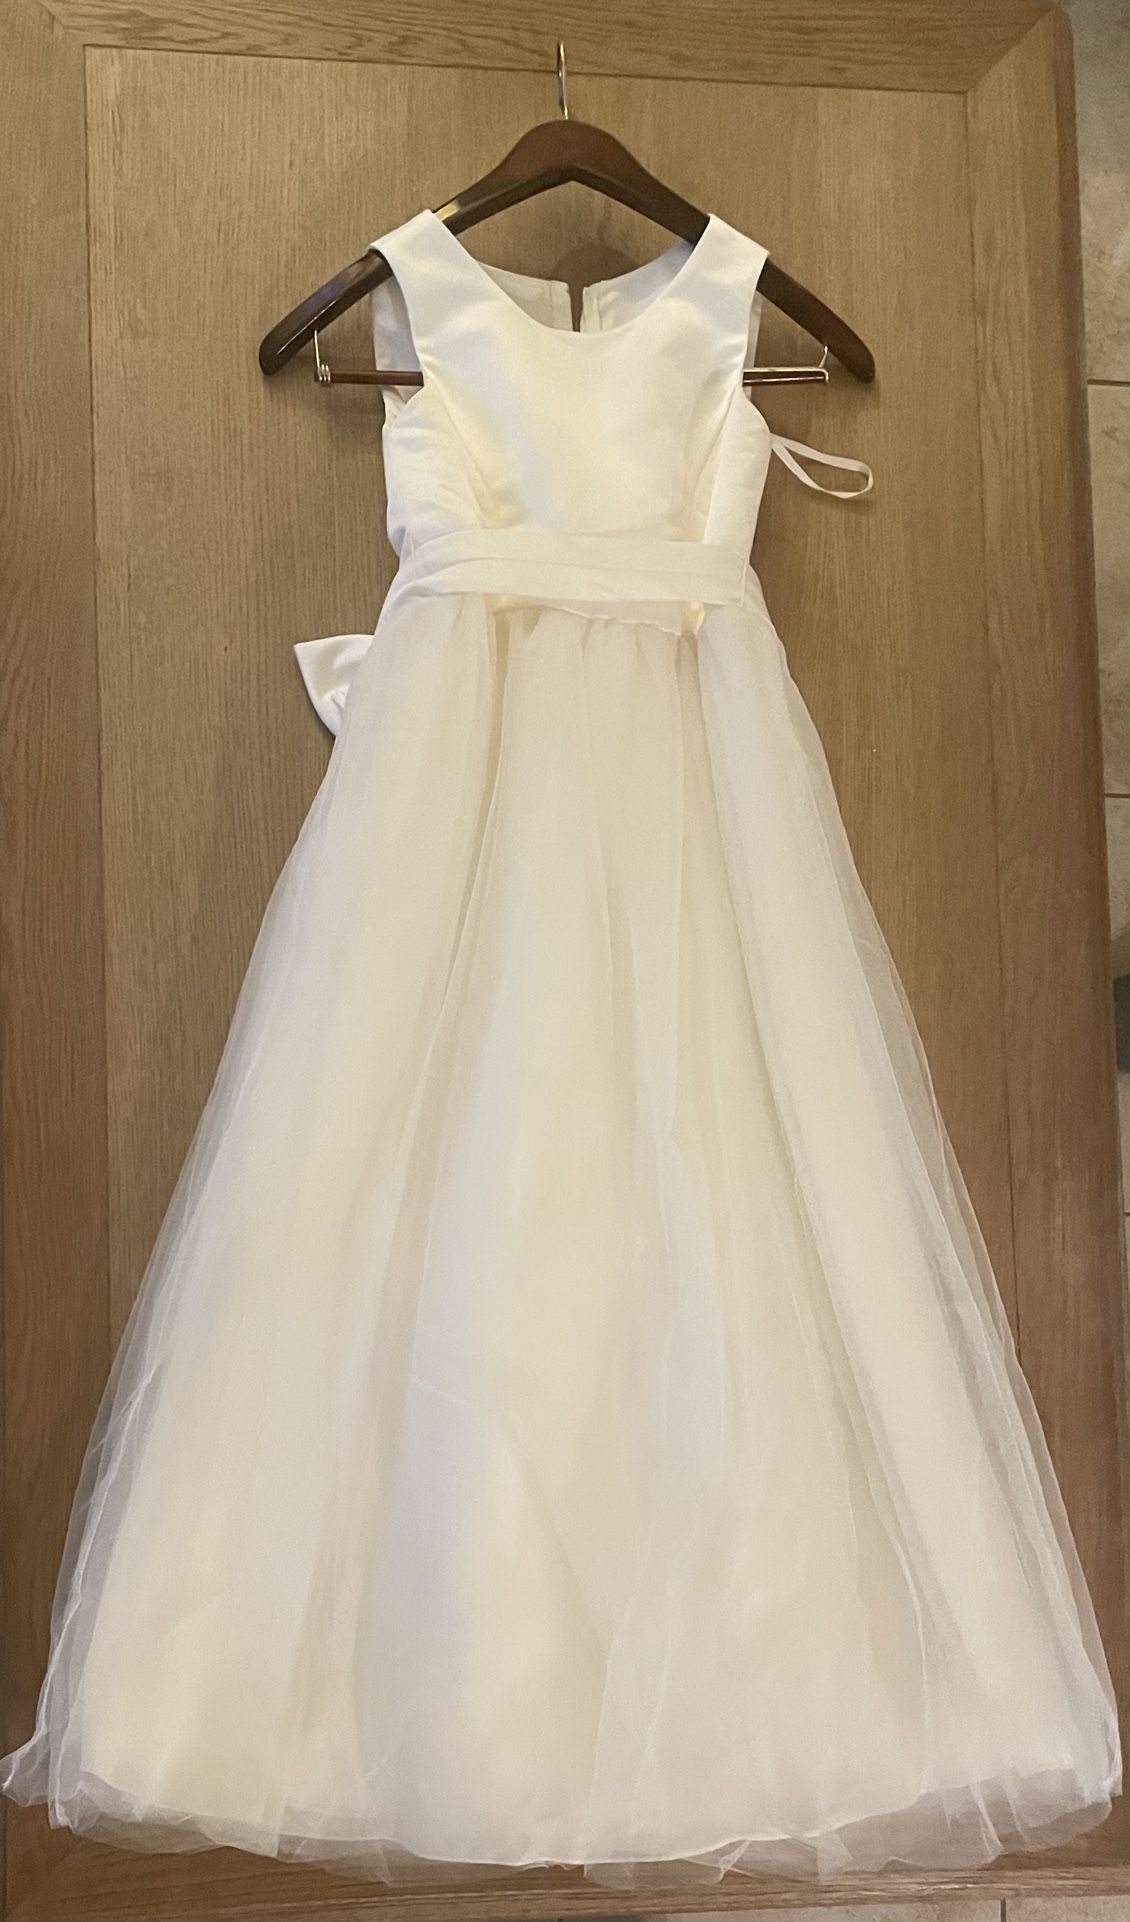 David’s Bridal Ivory Satin Dress with Tulle Skirt. Back zipper; fully lined. I have 2 dresses. Girls, Size 10 and 12.  Communion Dress